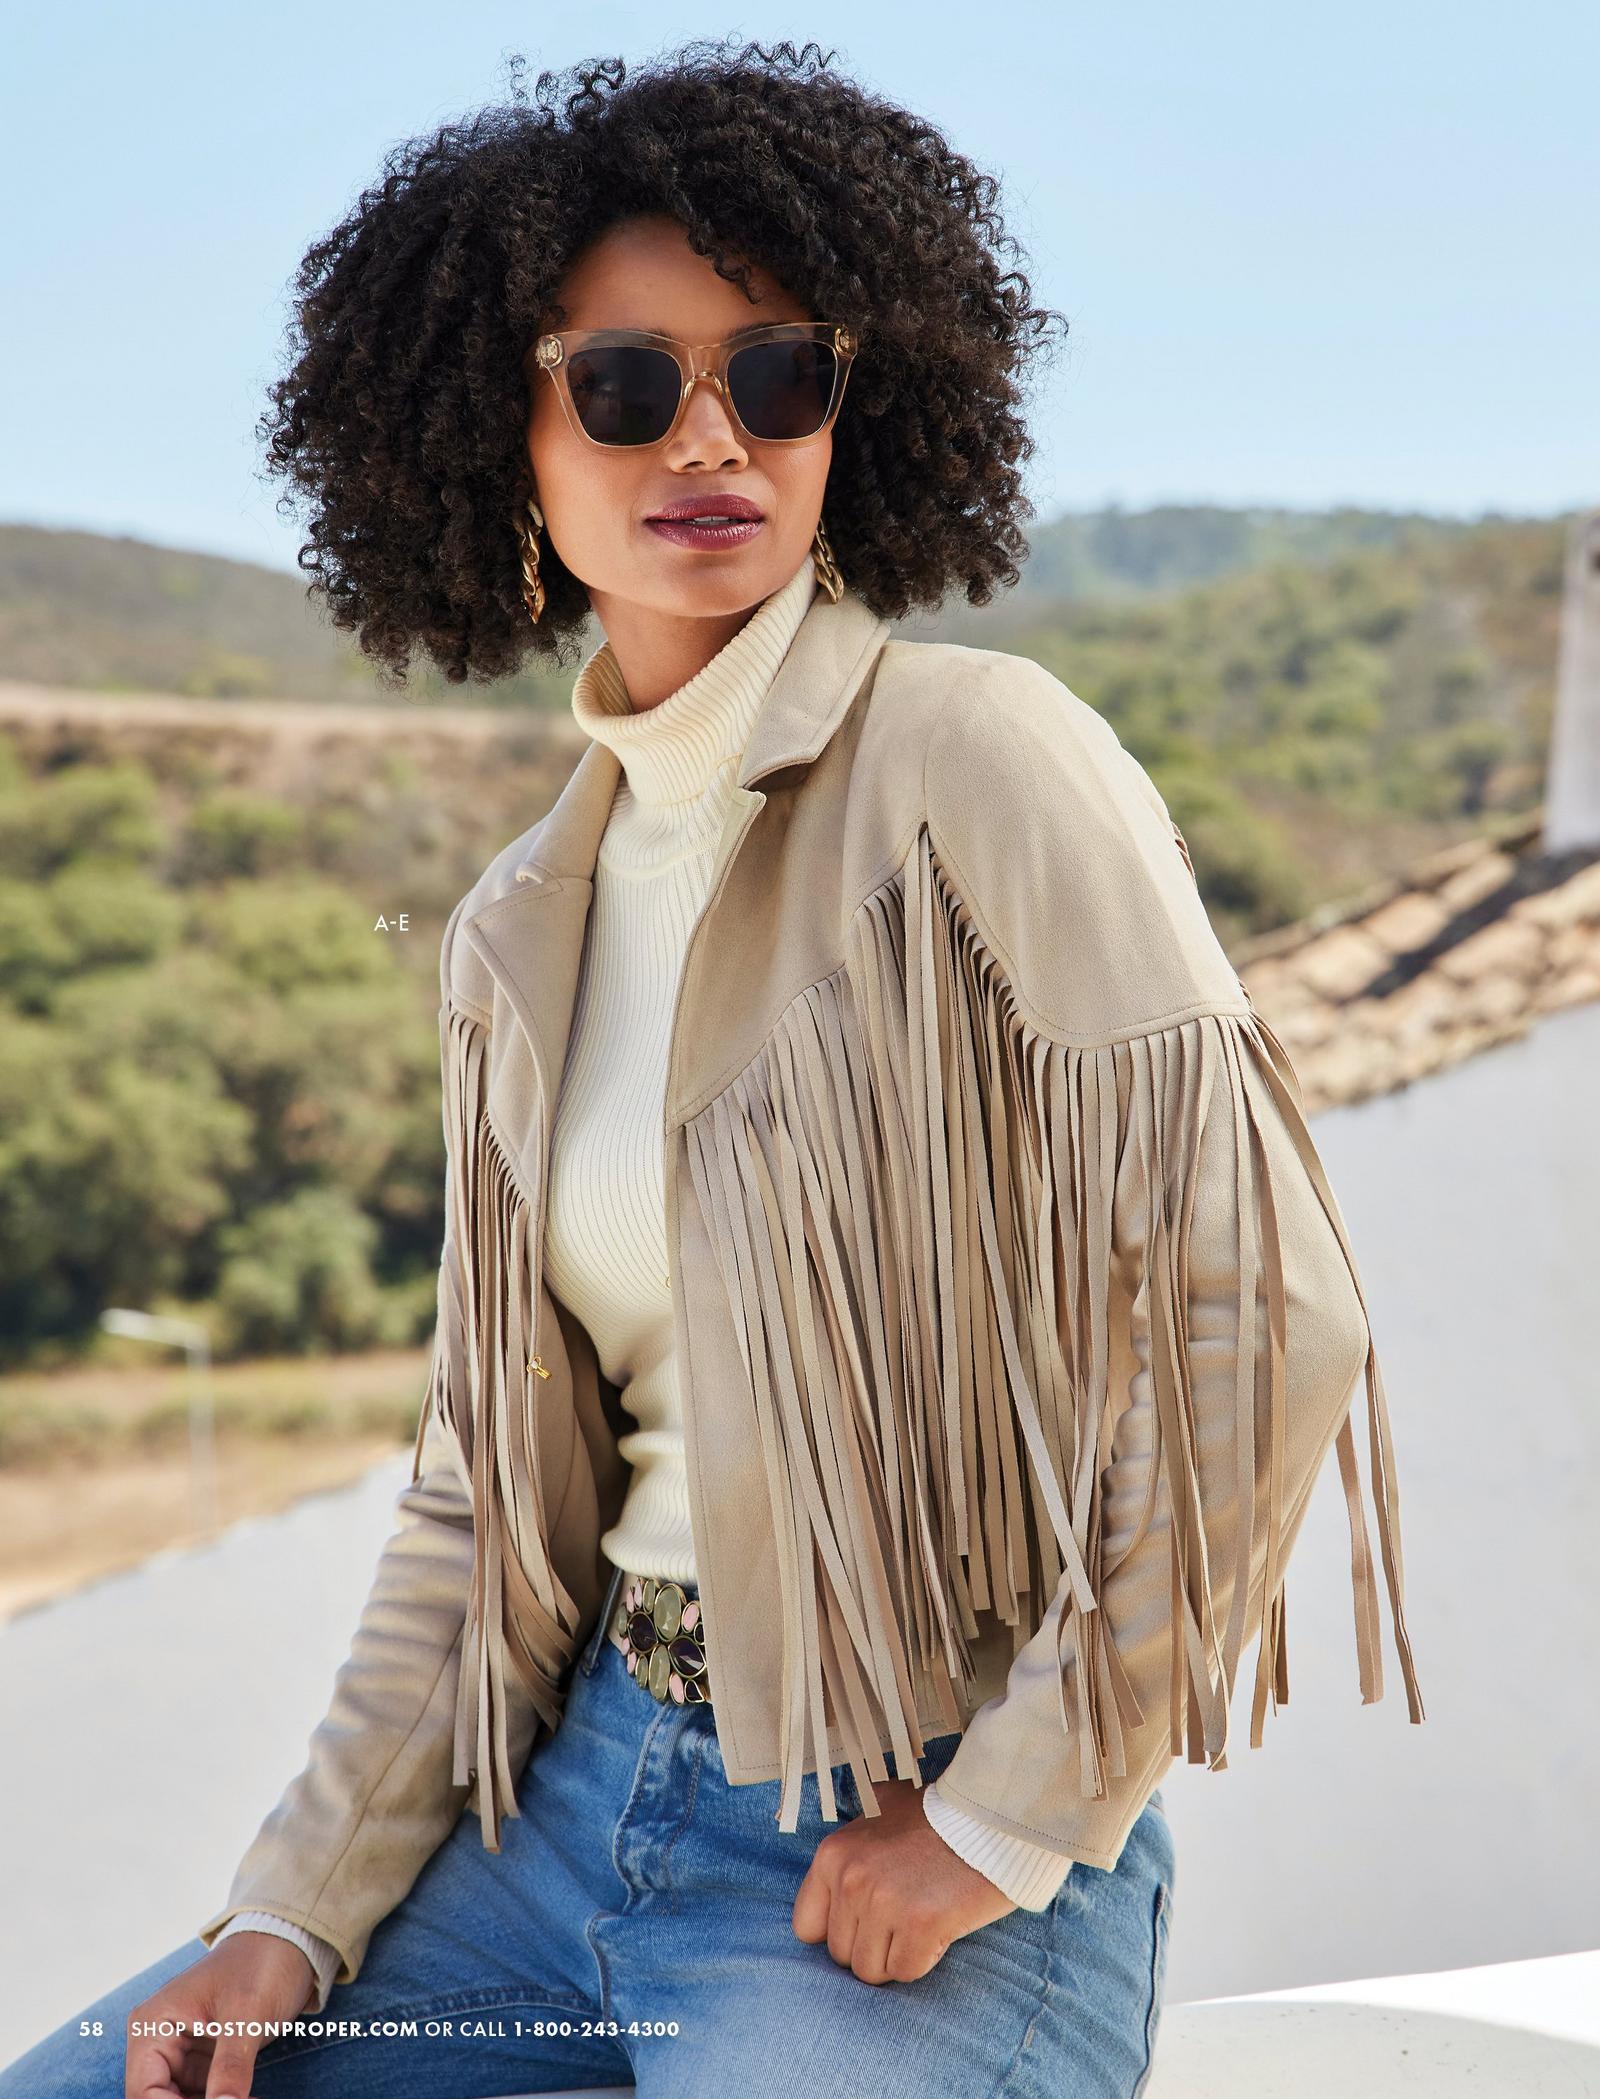 model wearing a tan fringe faux-suede jacket, off-white ribbed turtleneck sweater, stone embellished belt, jeans, gold chain earrings, and sunglasses.